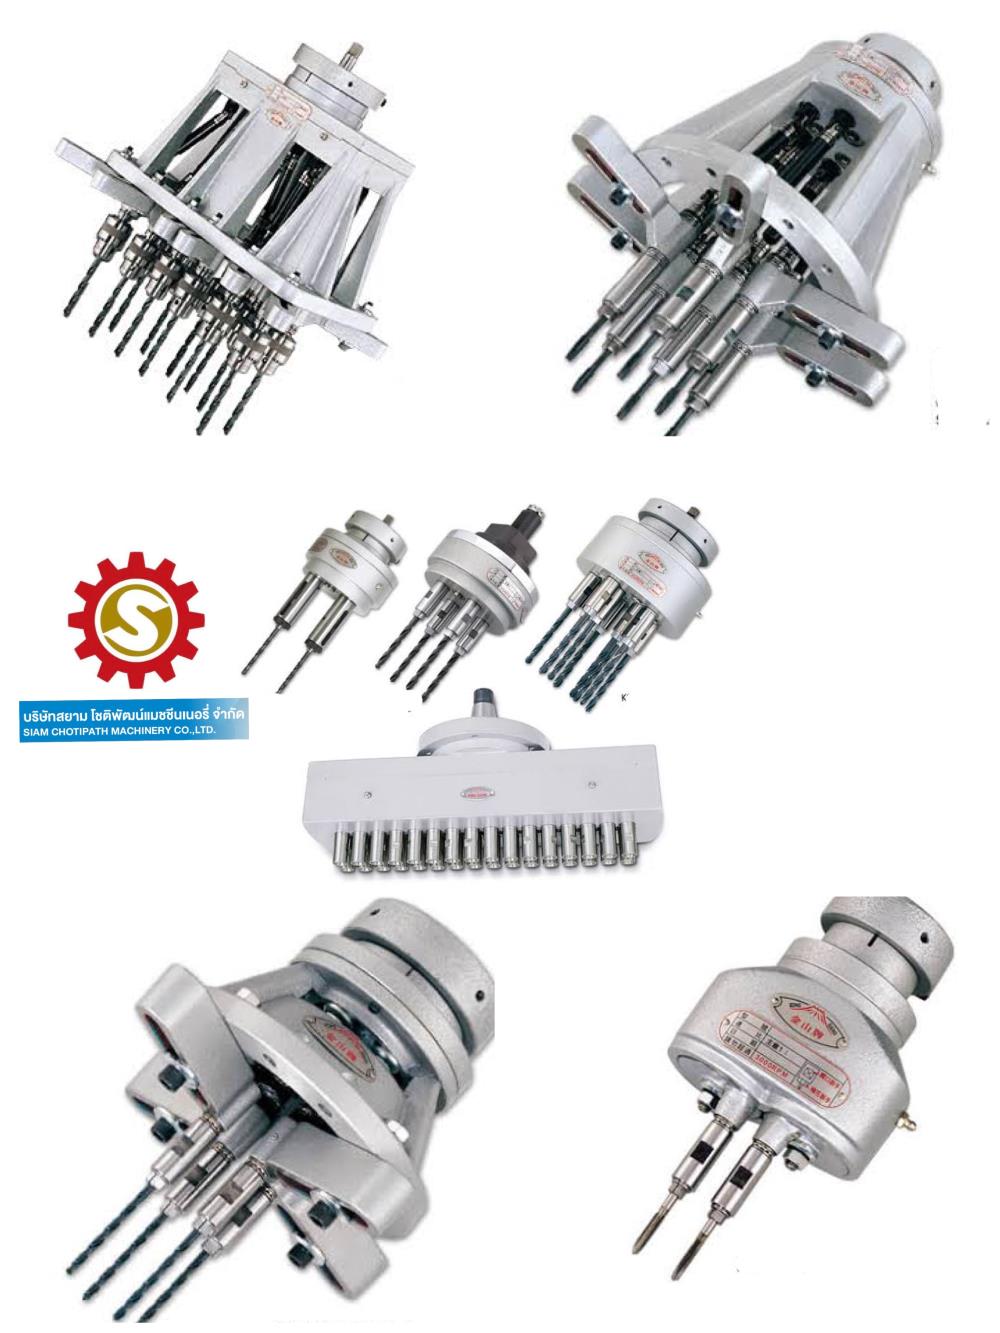 Multi-Spindle Drilling and Tapping Heads หัวเจาะหัวต๊าปหลายหัว,Multi-Spindle Drilling and Tapping Heads,หัวเจาะหัวต๊าปหลายหัว,Multi-Spindle Drilling and Tapping Heads หัวเจาะหัวต๊าปหลายหัว,Custom Manufacturing and Fabricating/Drilling